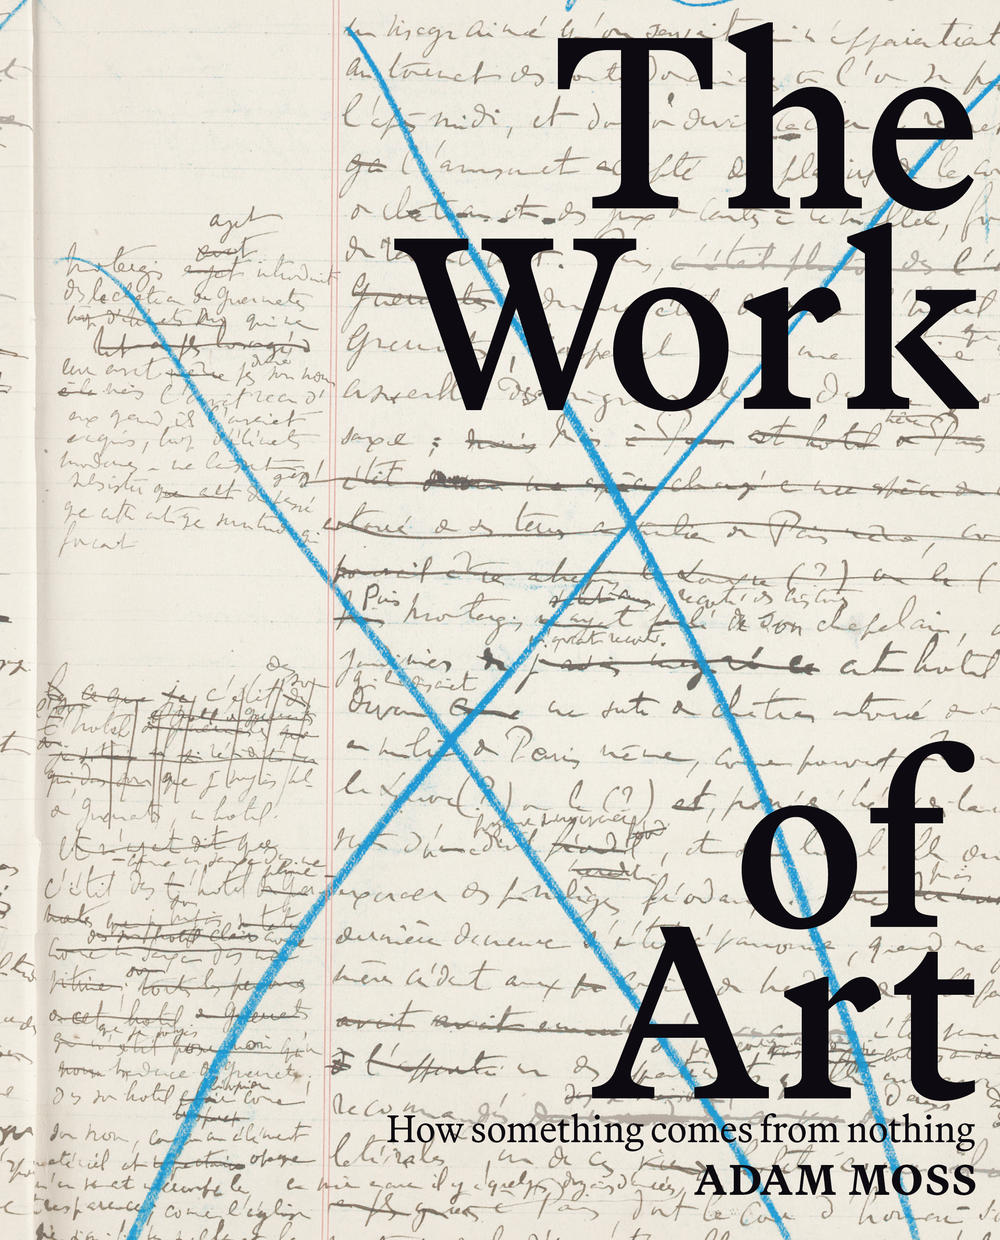 Adam Moss' <em>The Work of Art: How Something Comes from Nothing</em> features interviews with more than 40 creatives about their process, from blank page to final product.